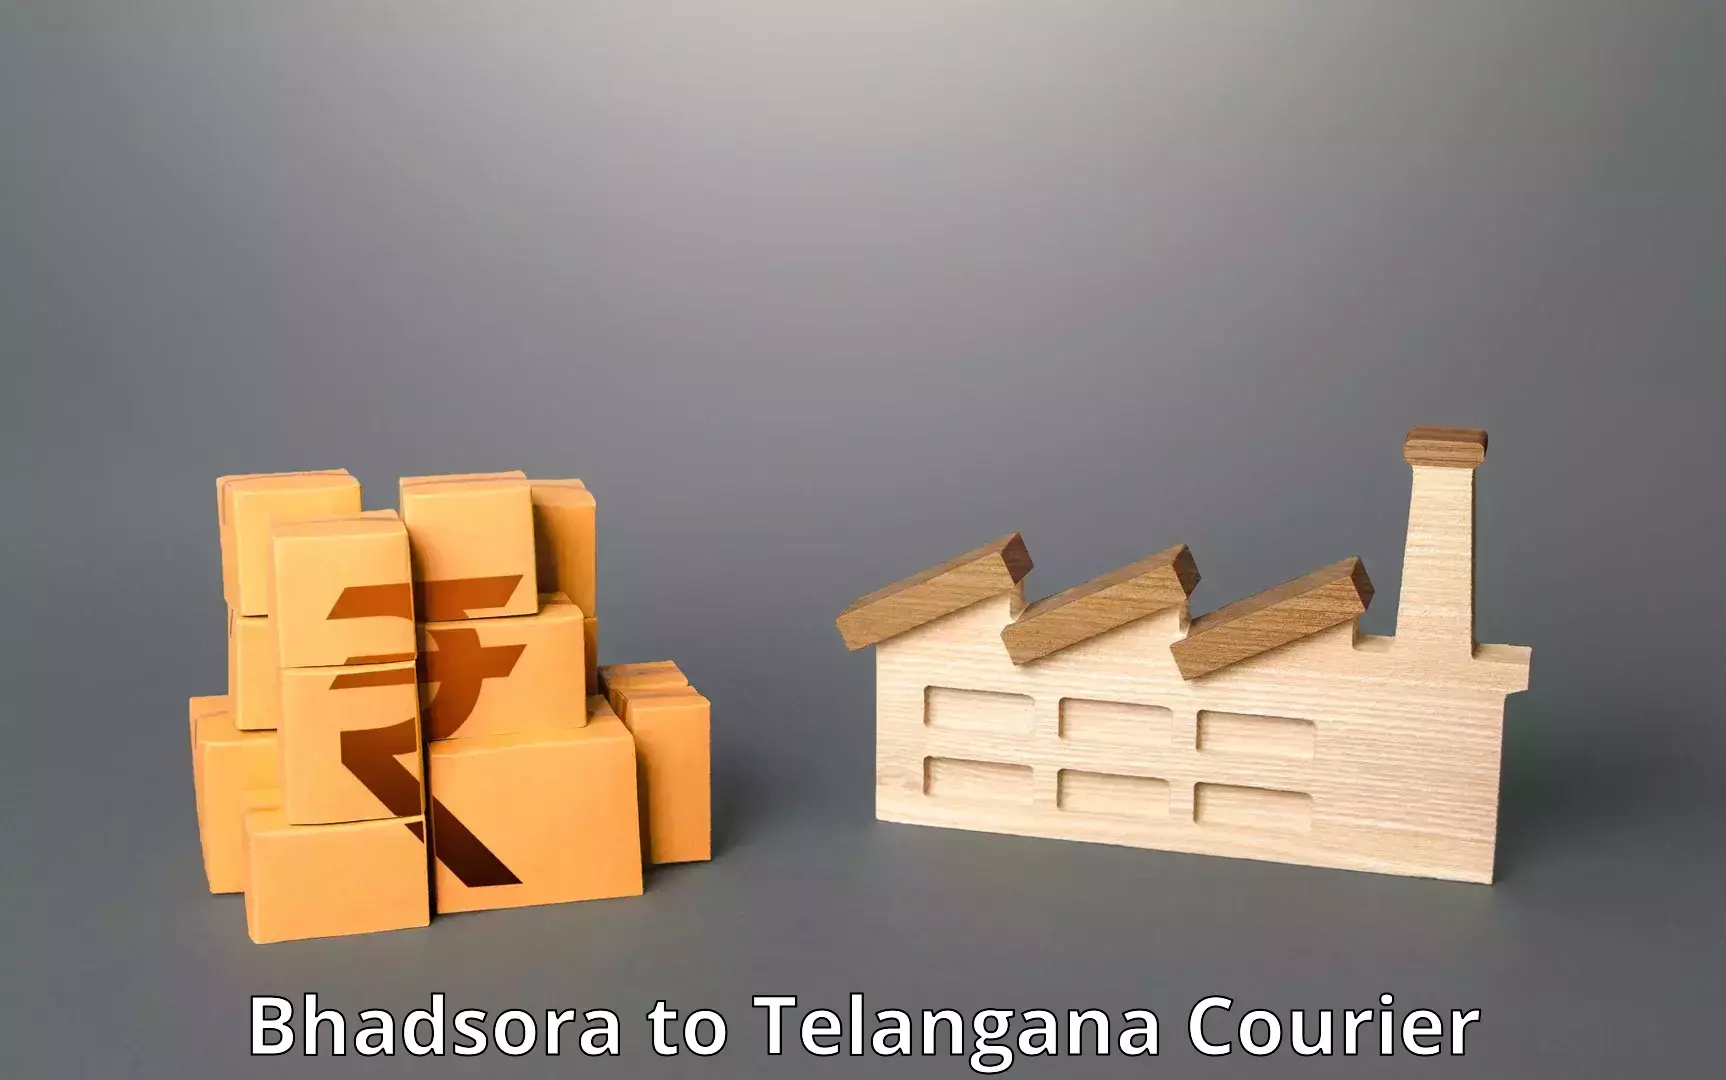 Courier service innovation Bhadsora to Telangana